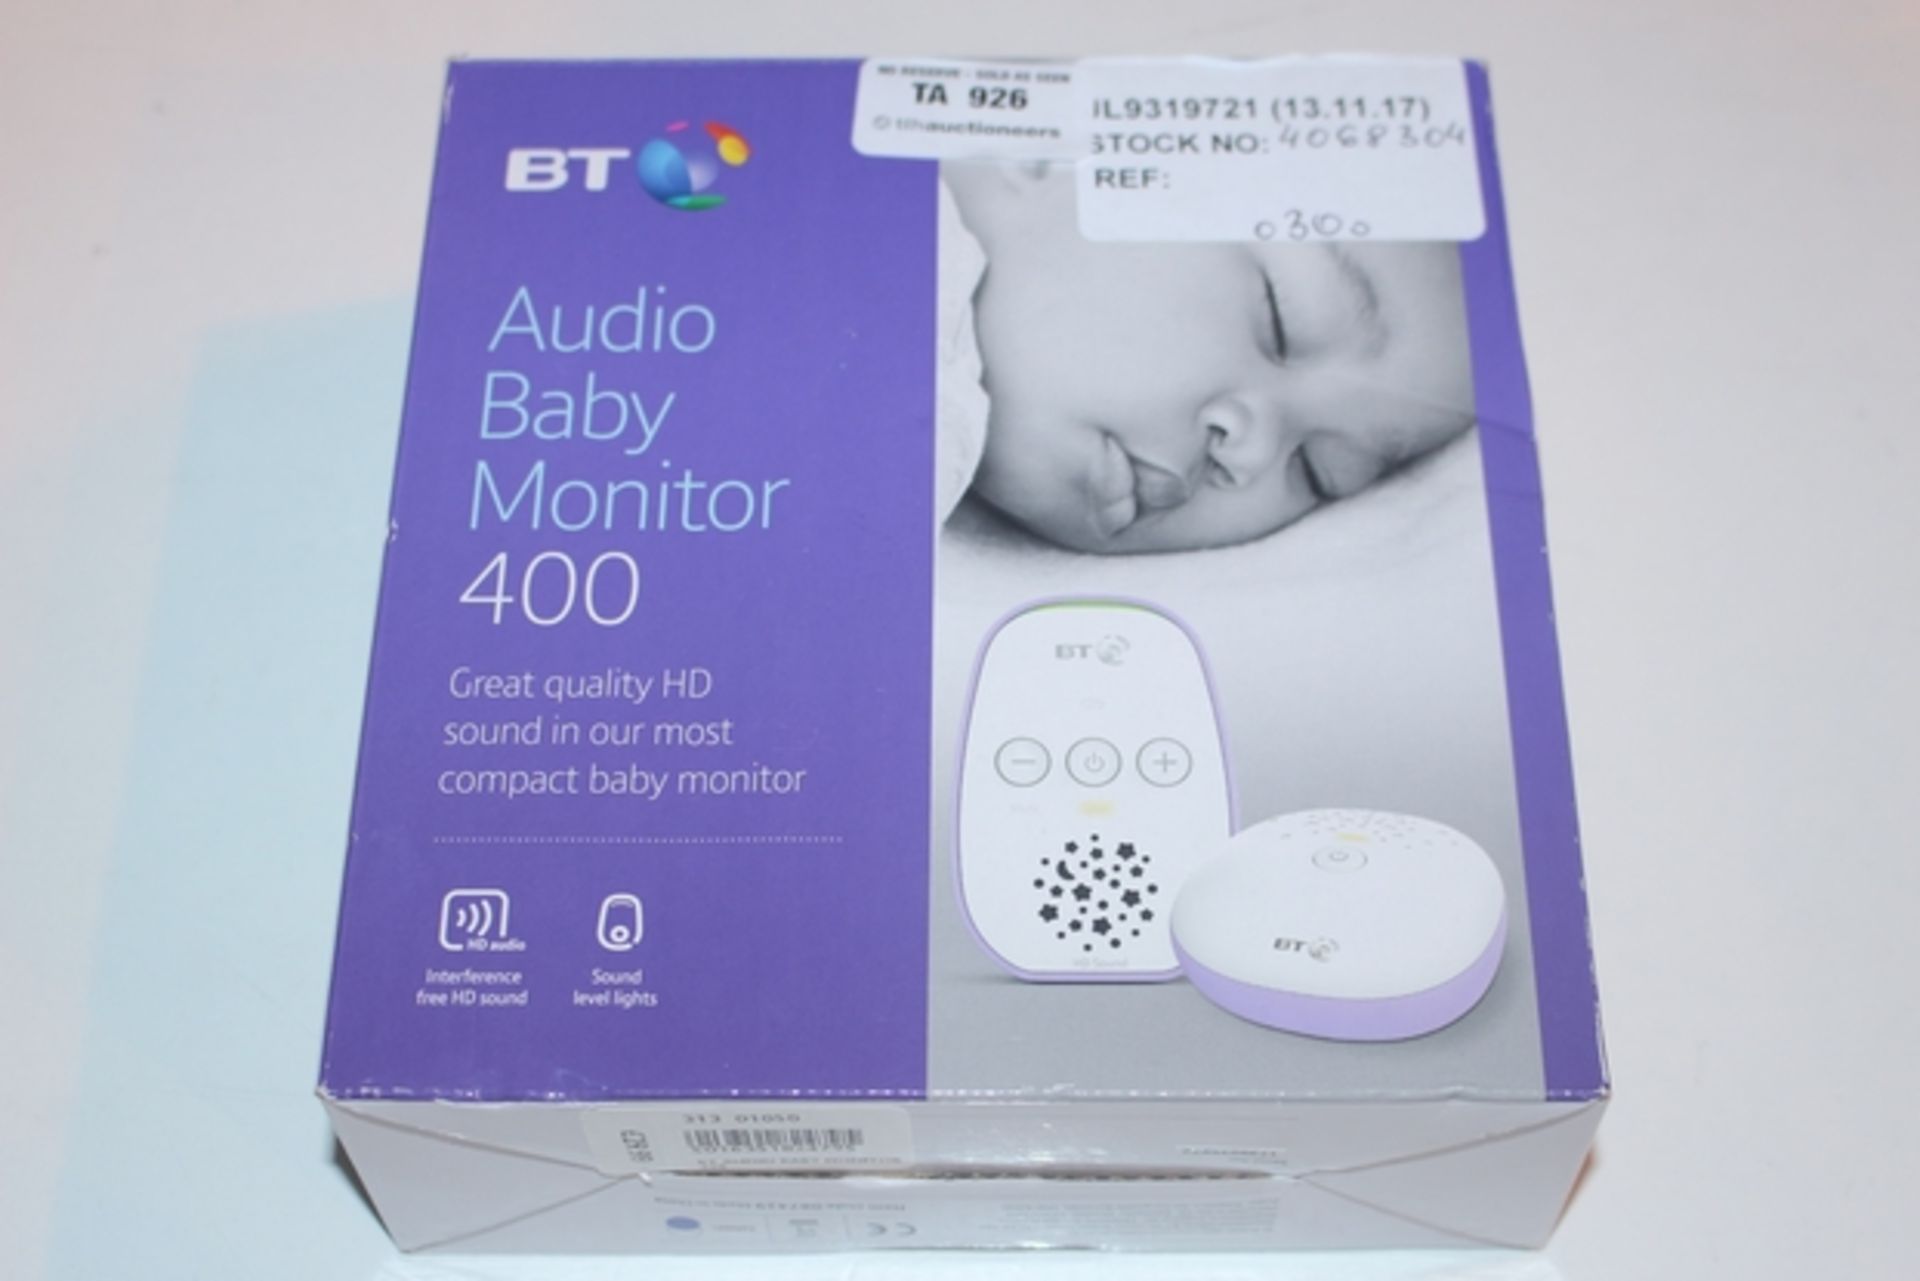 1X BOXED BT AUDIO BABY MONITOR 400 RRP £40 (JL-9319721) (13/11/17) (4068304)